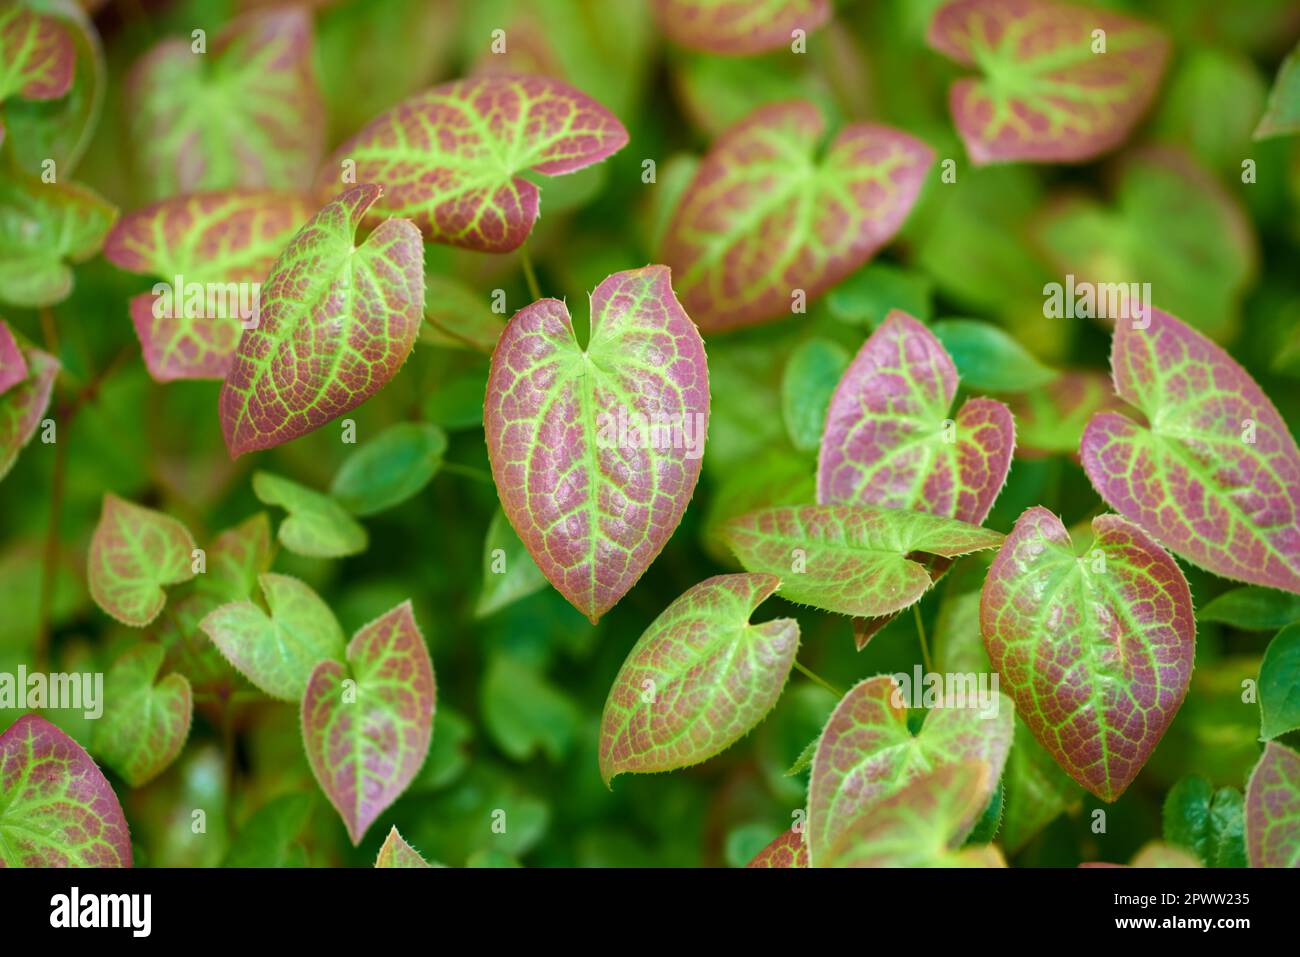 Bright green and red leaves growing in a garden. Closeup of barrenwort, fairy wings or persian epimedium from the berberidaceae species of flowering p Stock Photo